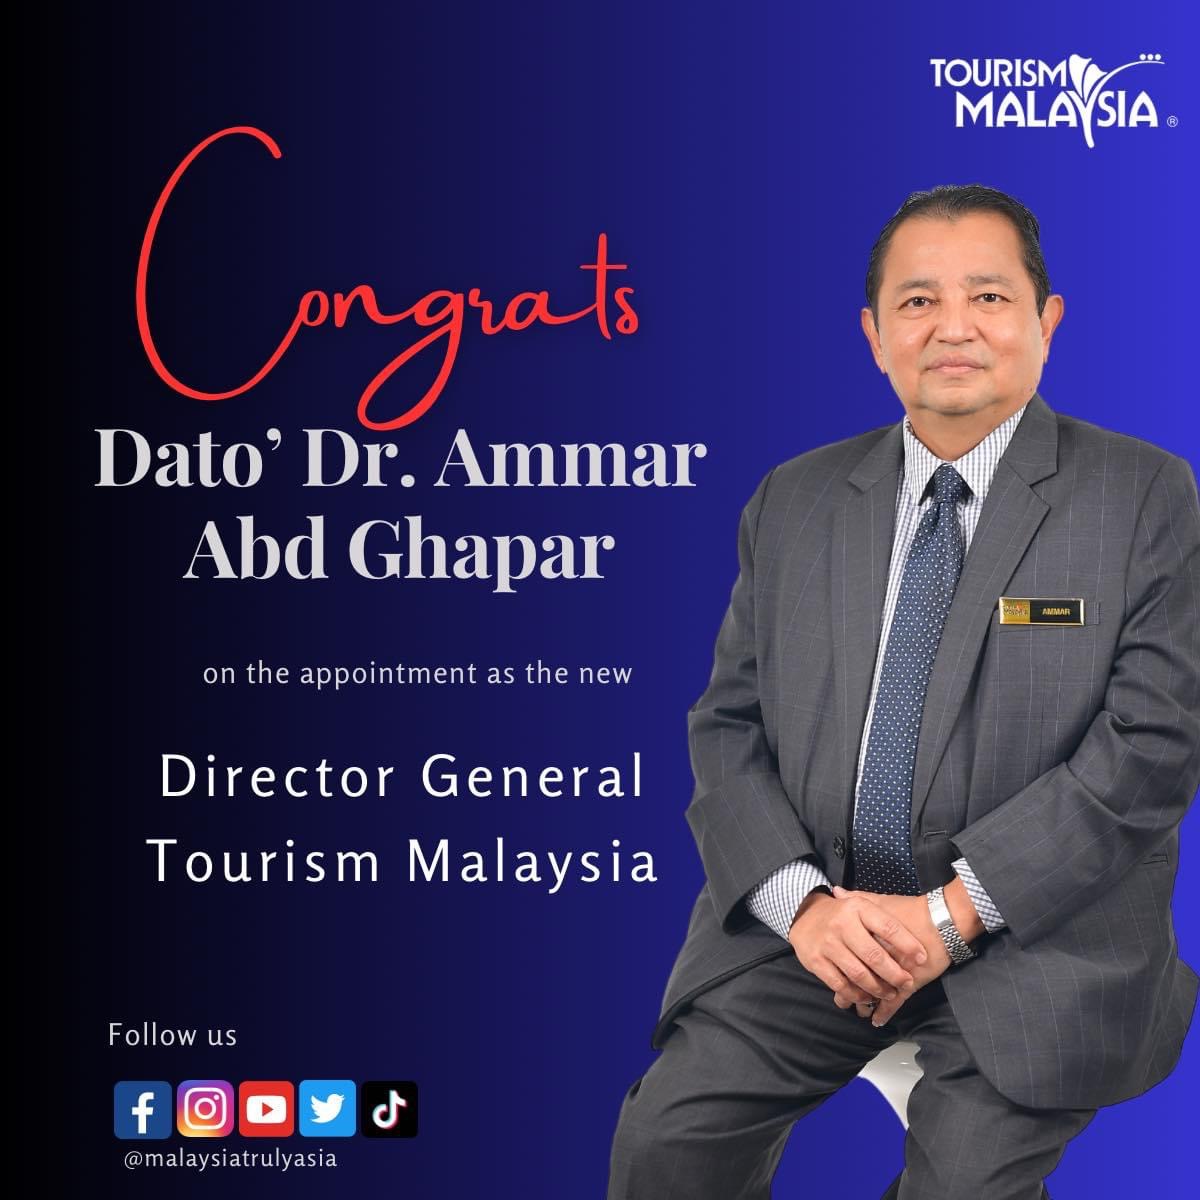 commissioner of tourism malaysia registered hotels